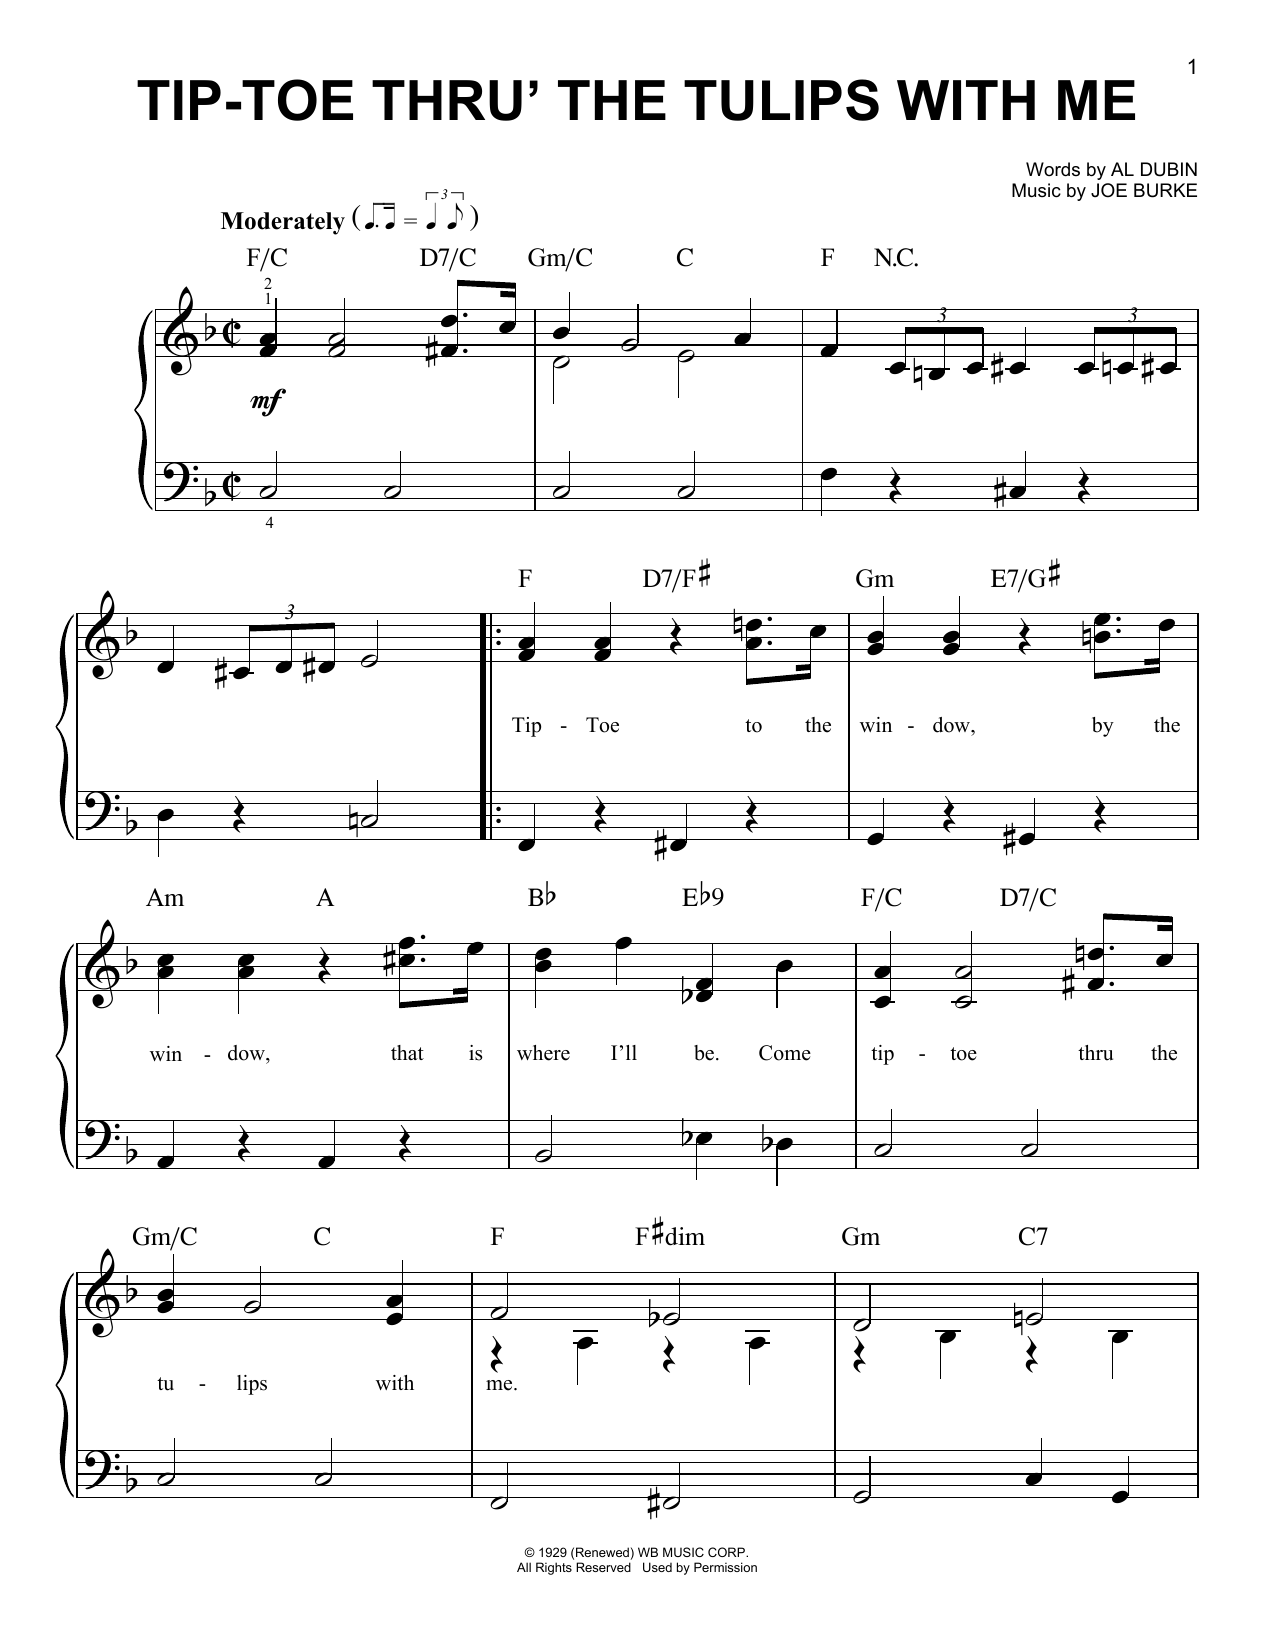 Download Al Dubin Tip-Toe Thru' The Tulips With Me Sheet Music